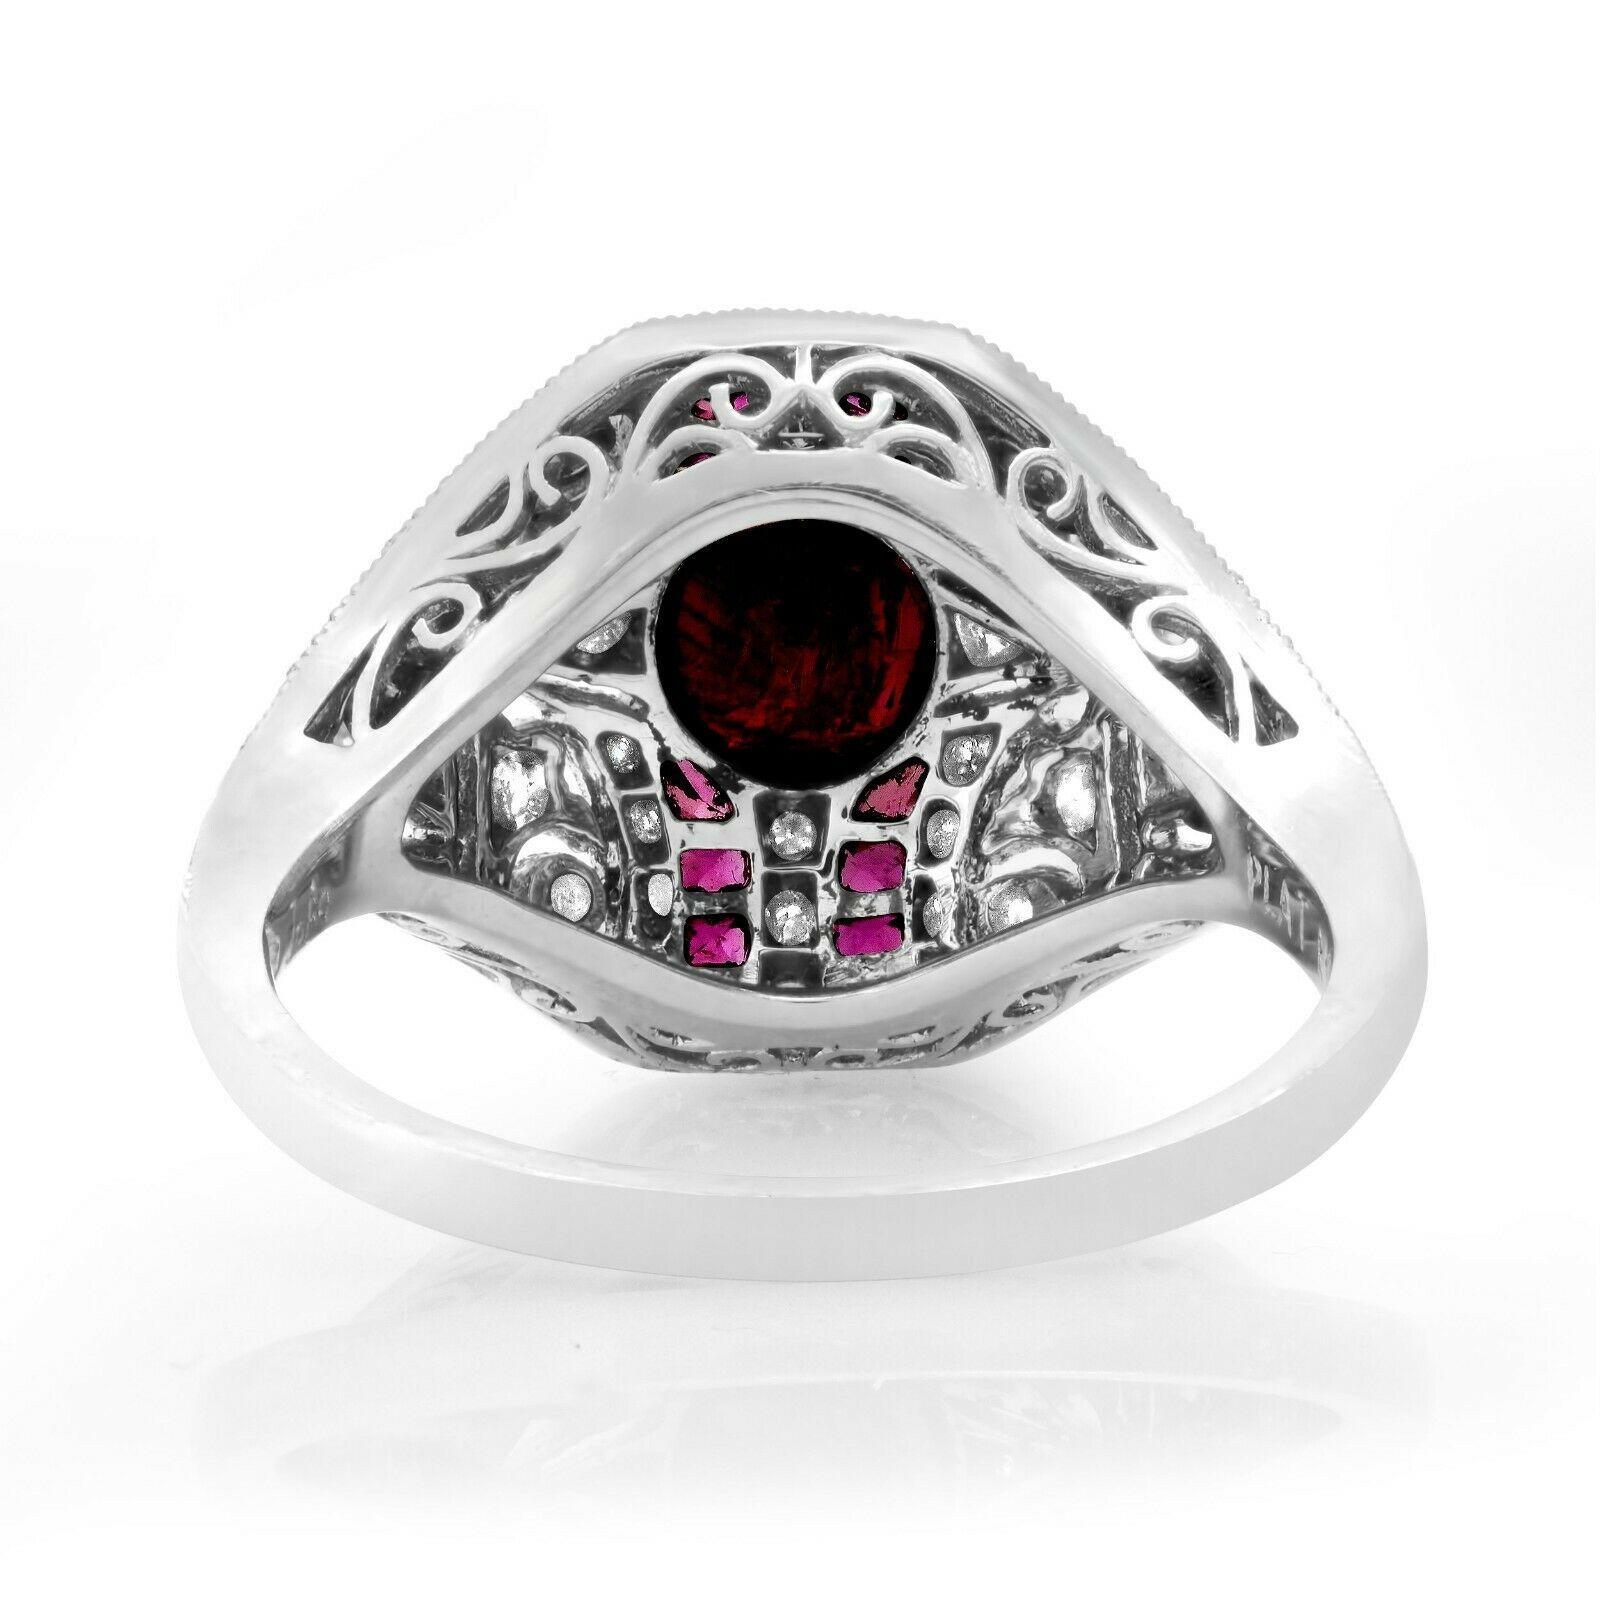 Ruby (1.05 total carat weight) and diamond (0.49 total carat weight) antique inspired cocktail ring in 900 platinum. The ring is designed and handmade locally in Los Angeles by Sage Designs L.A. using earth-mined and conflict free diamonds and